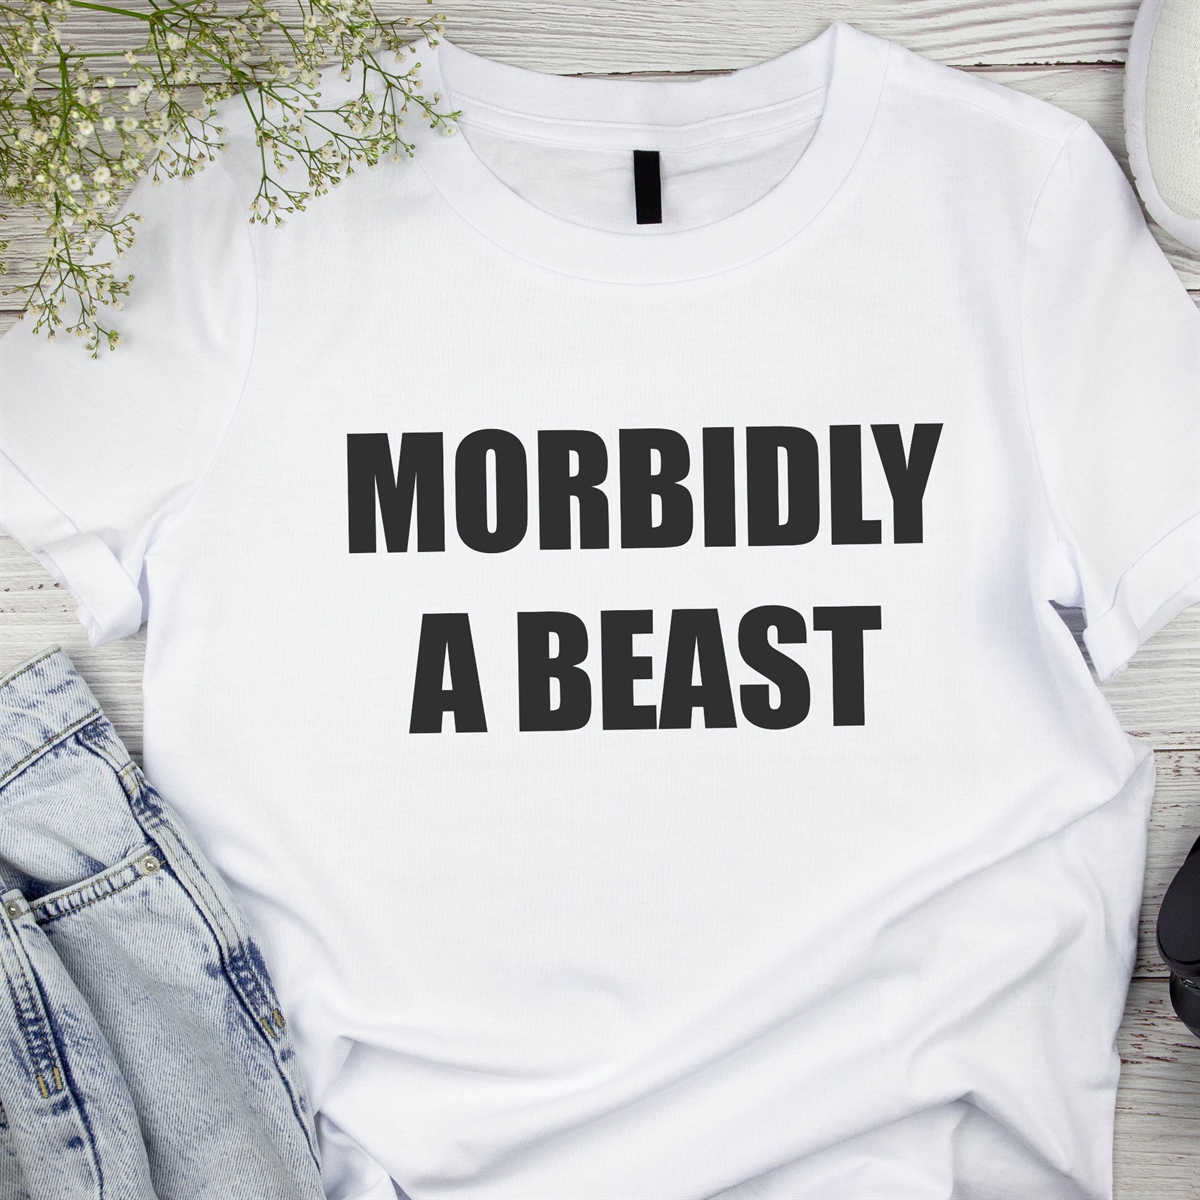 Morbidly A Beast Tee Funny Graphic Shirt Unisex Humorous Dad Gift Cotton Unisex Tshirt Cool Husband Present Hilarious Men Womens Top